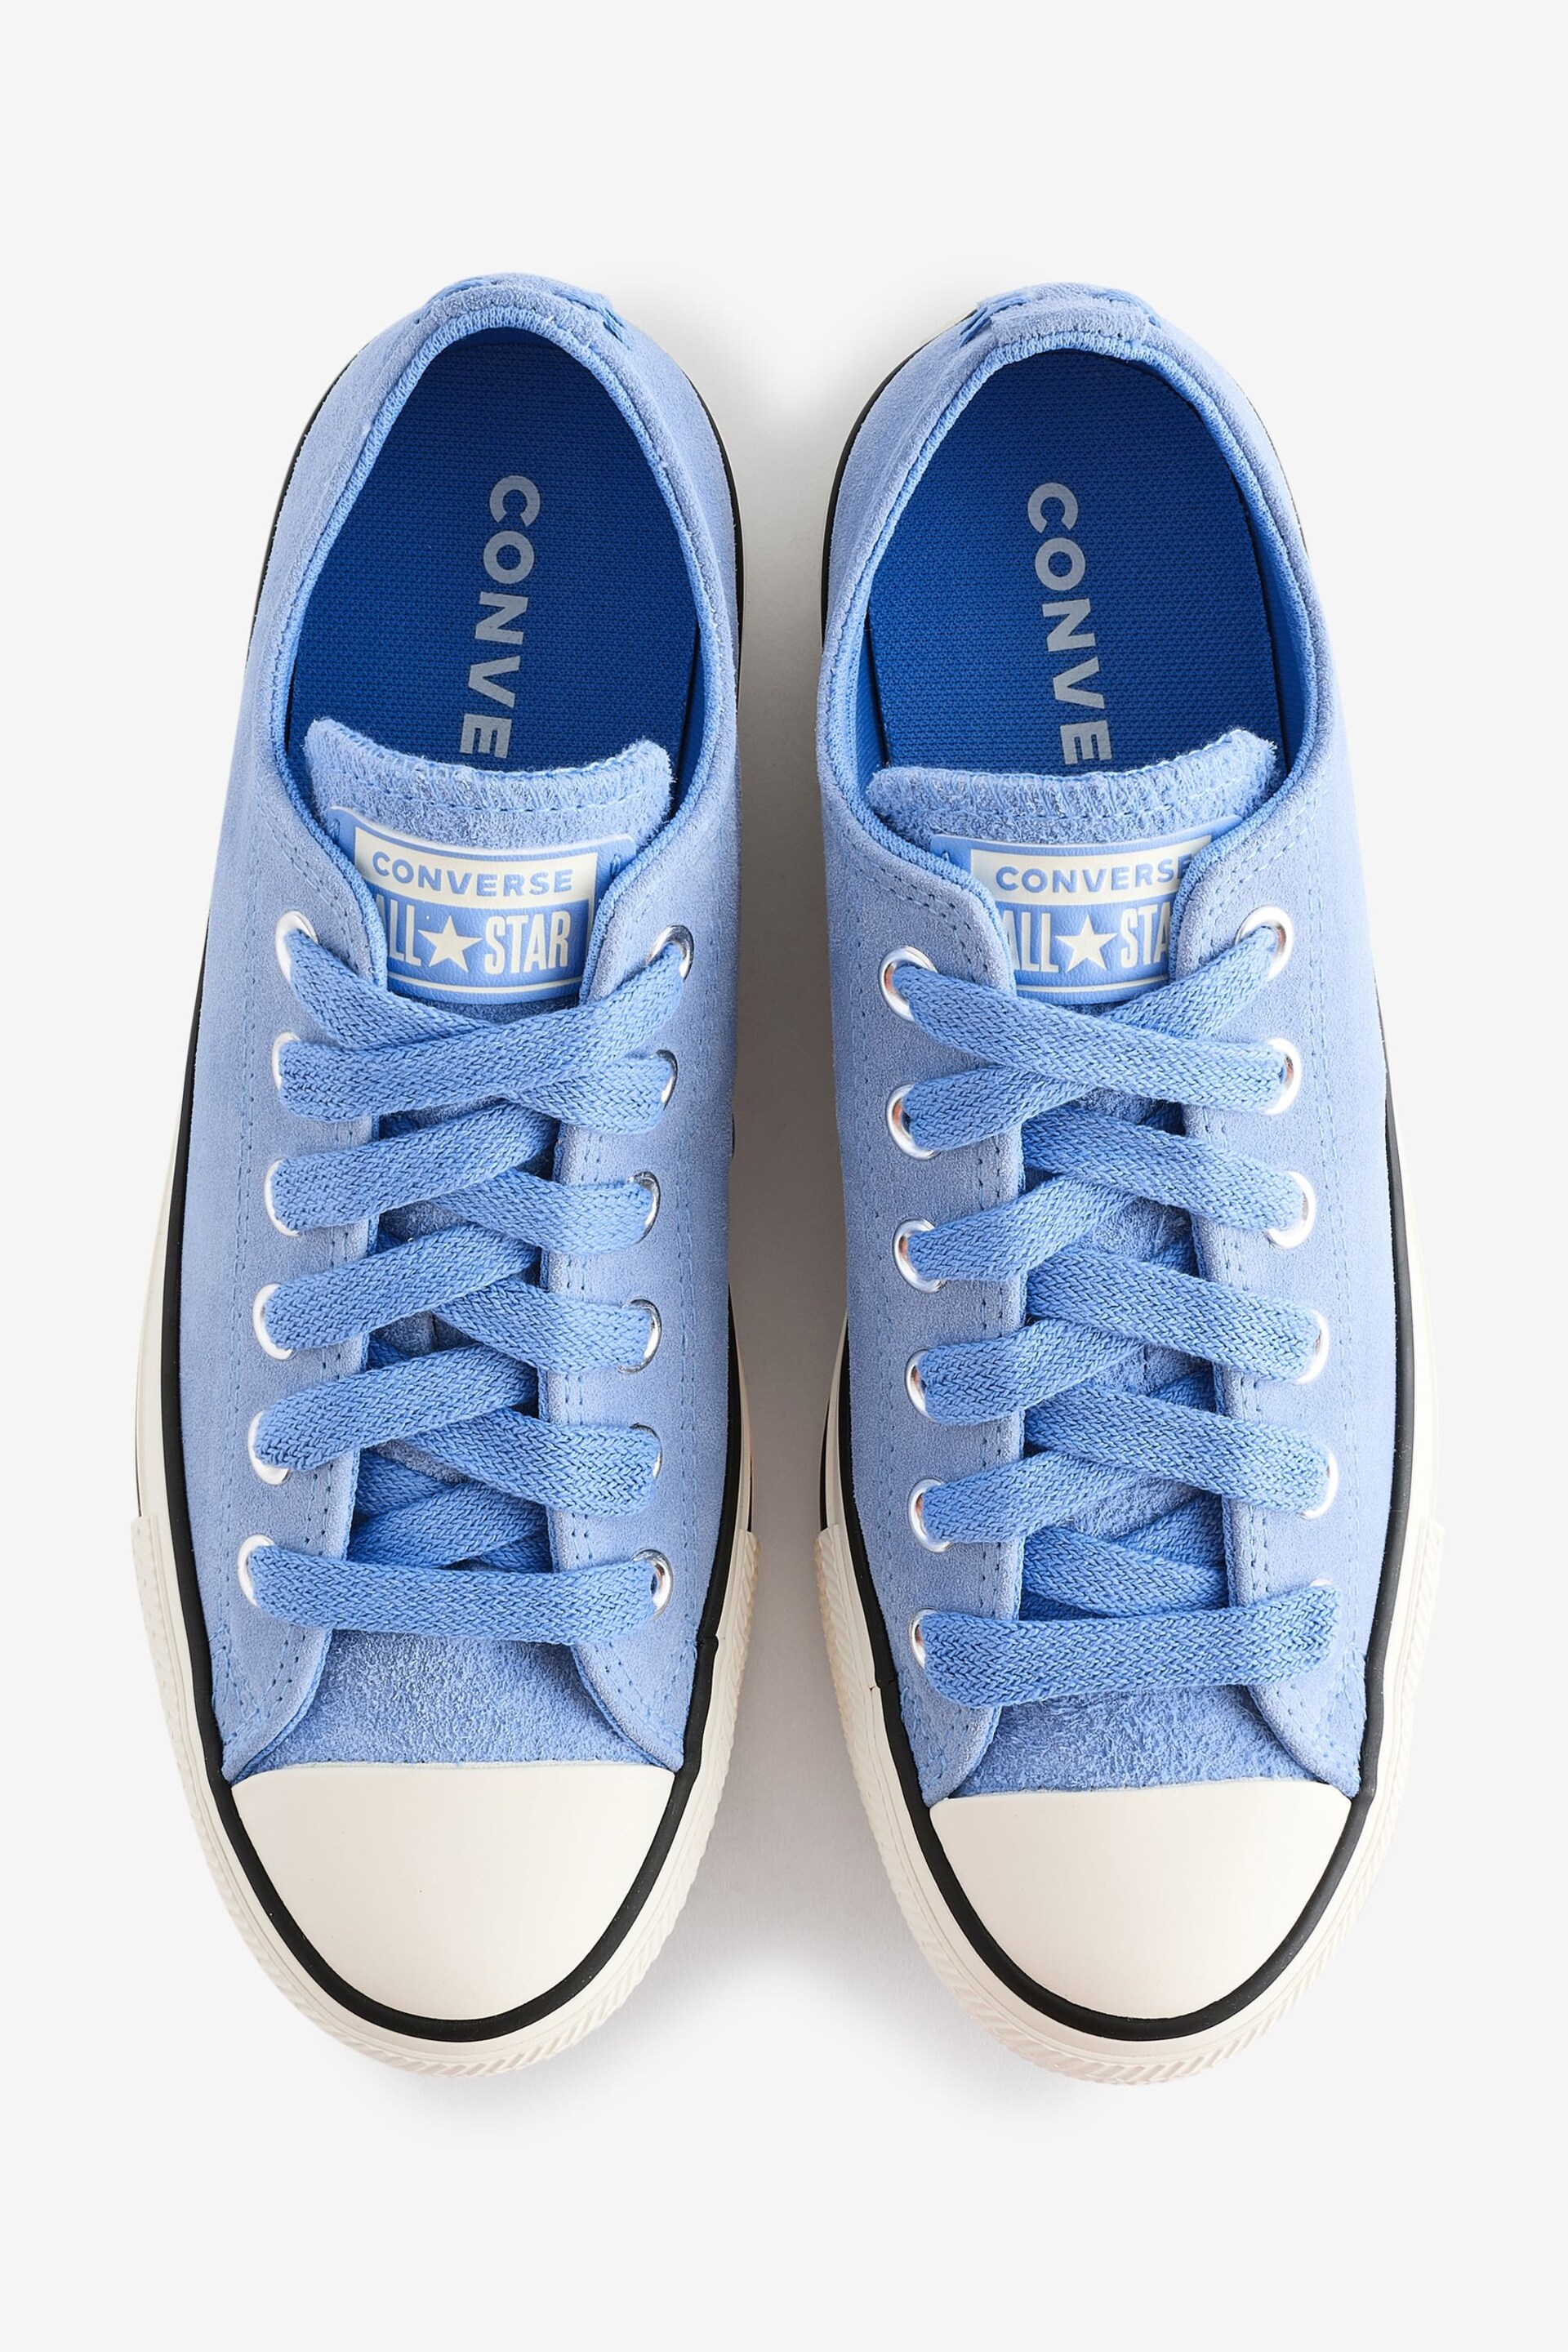 Converse Light Blue Chuck Taylor All Star Suede Ox Trainers - Image 5 of 9